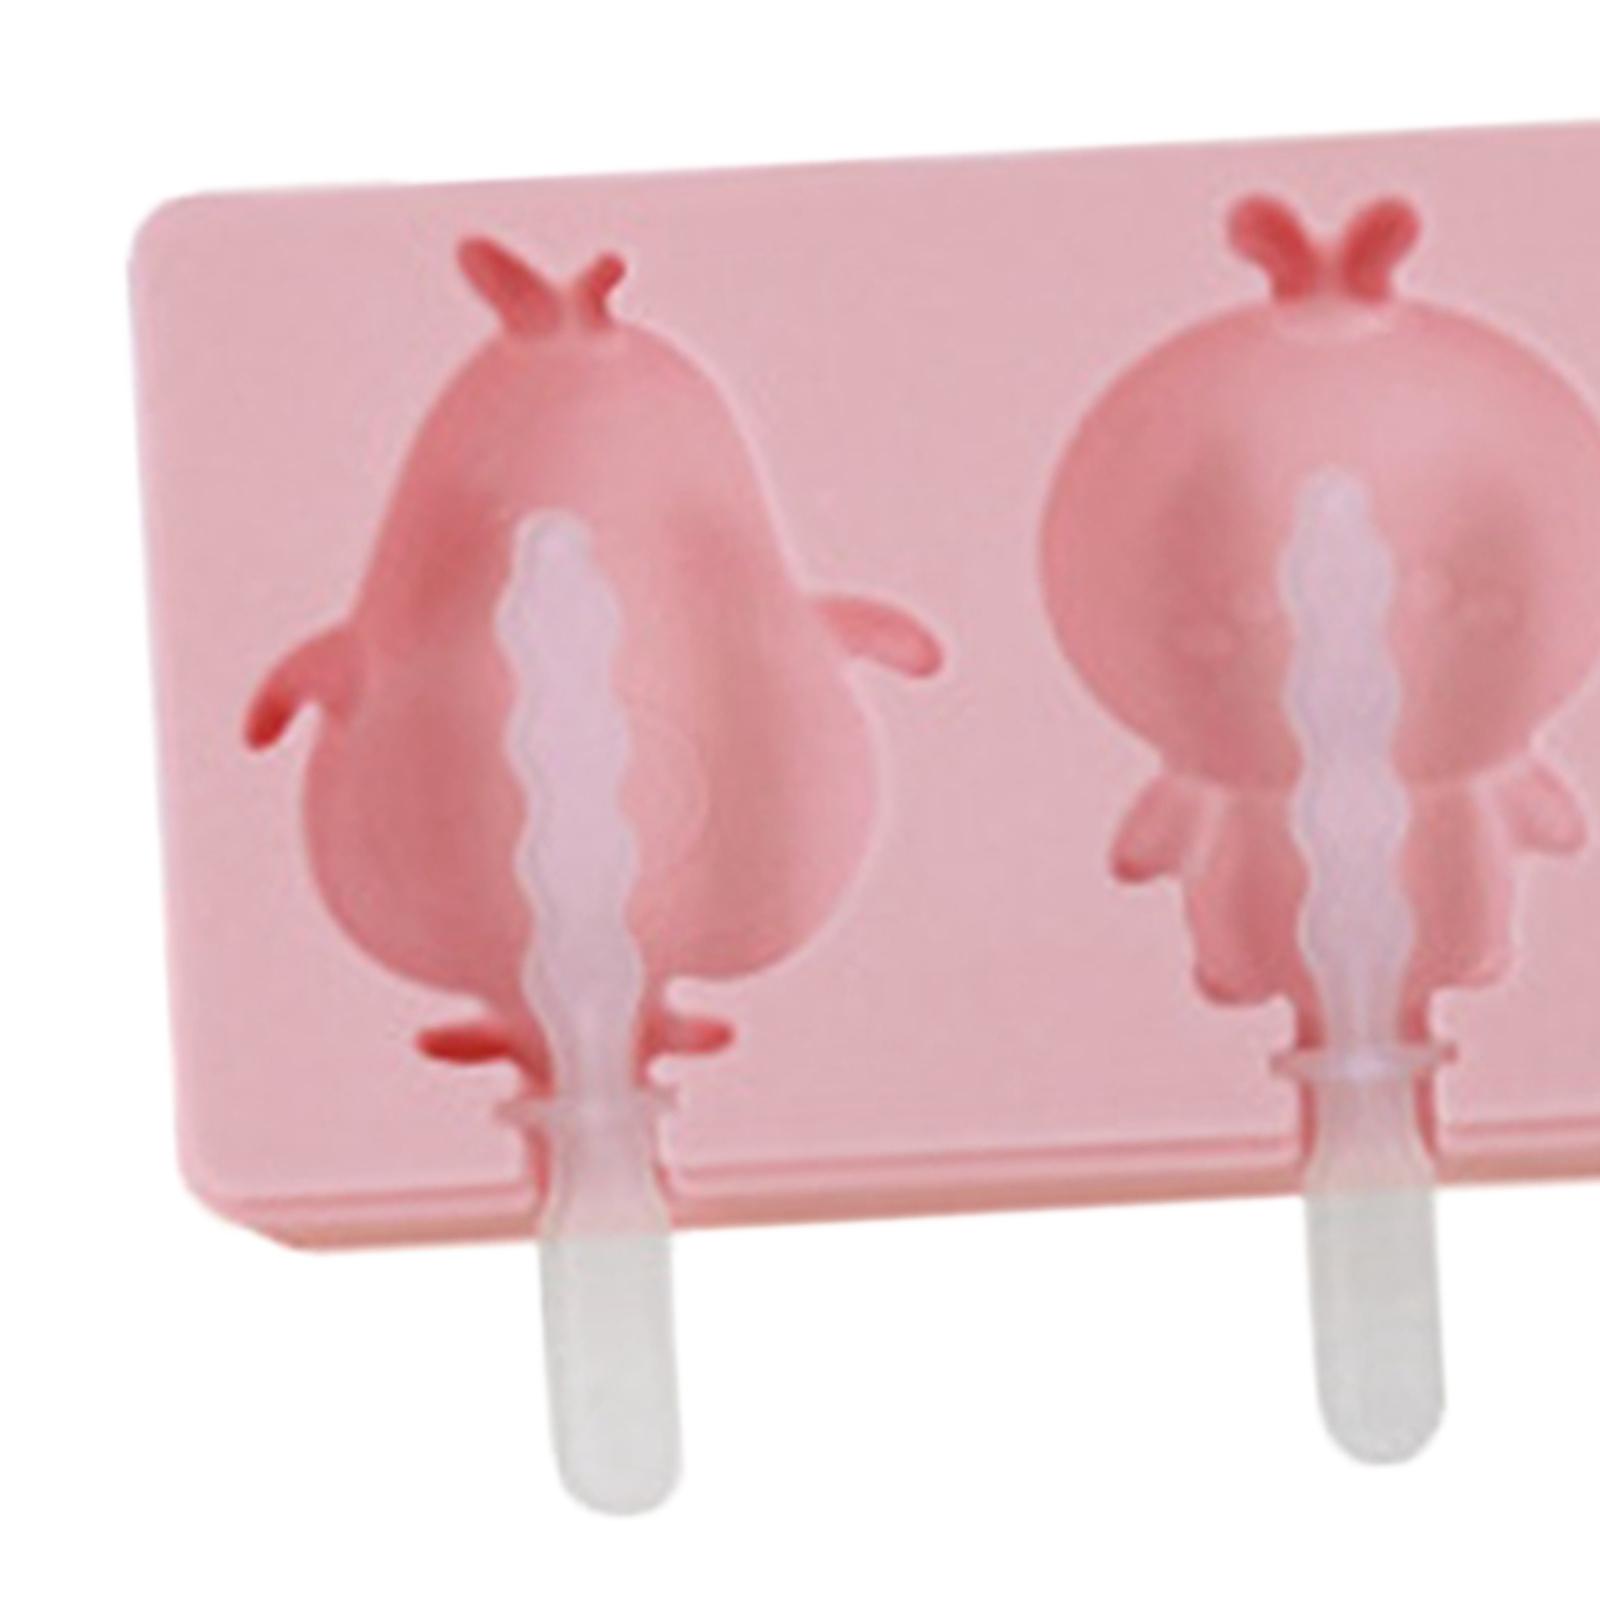 Popsicle maker for Release Cartoon Removable Cute Image Ice Making style B